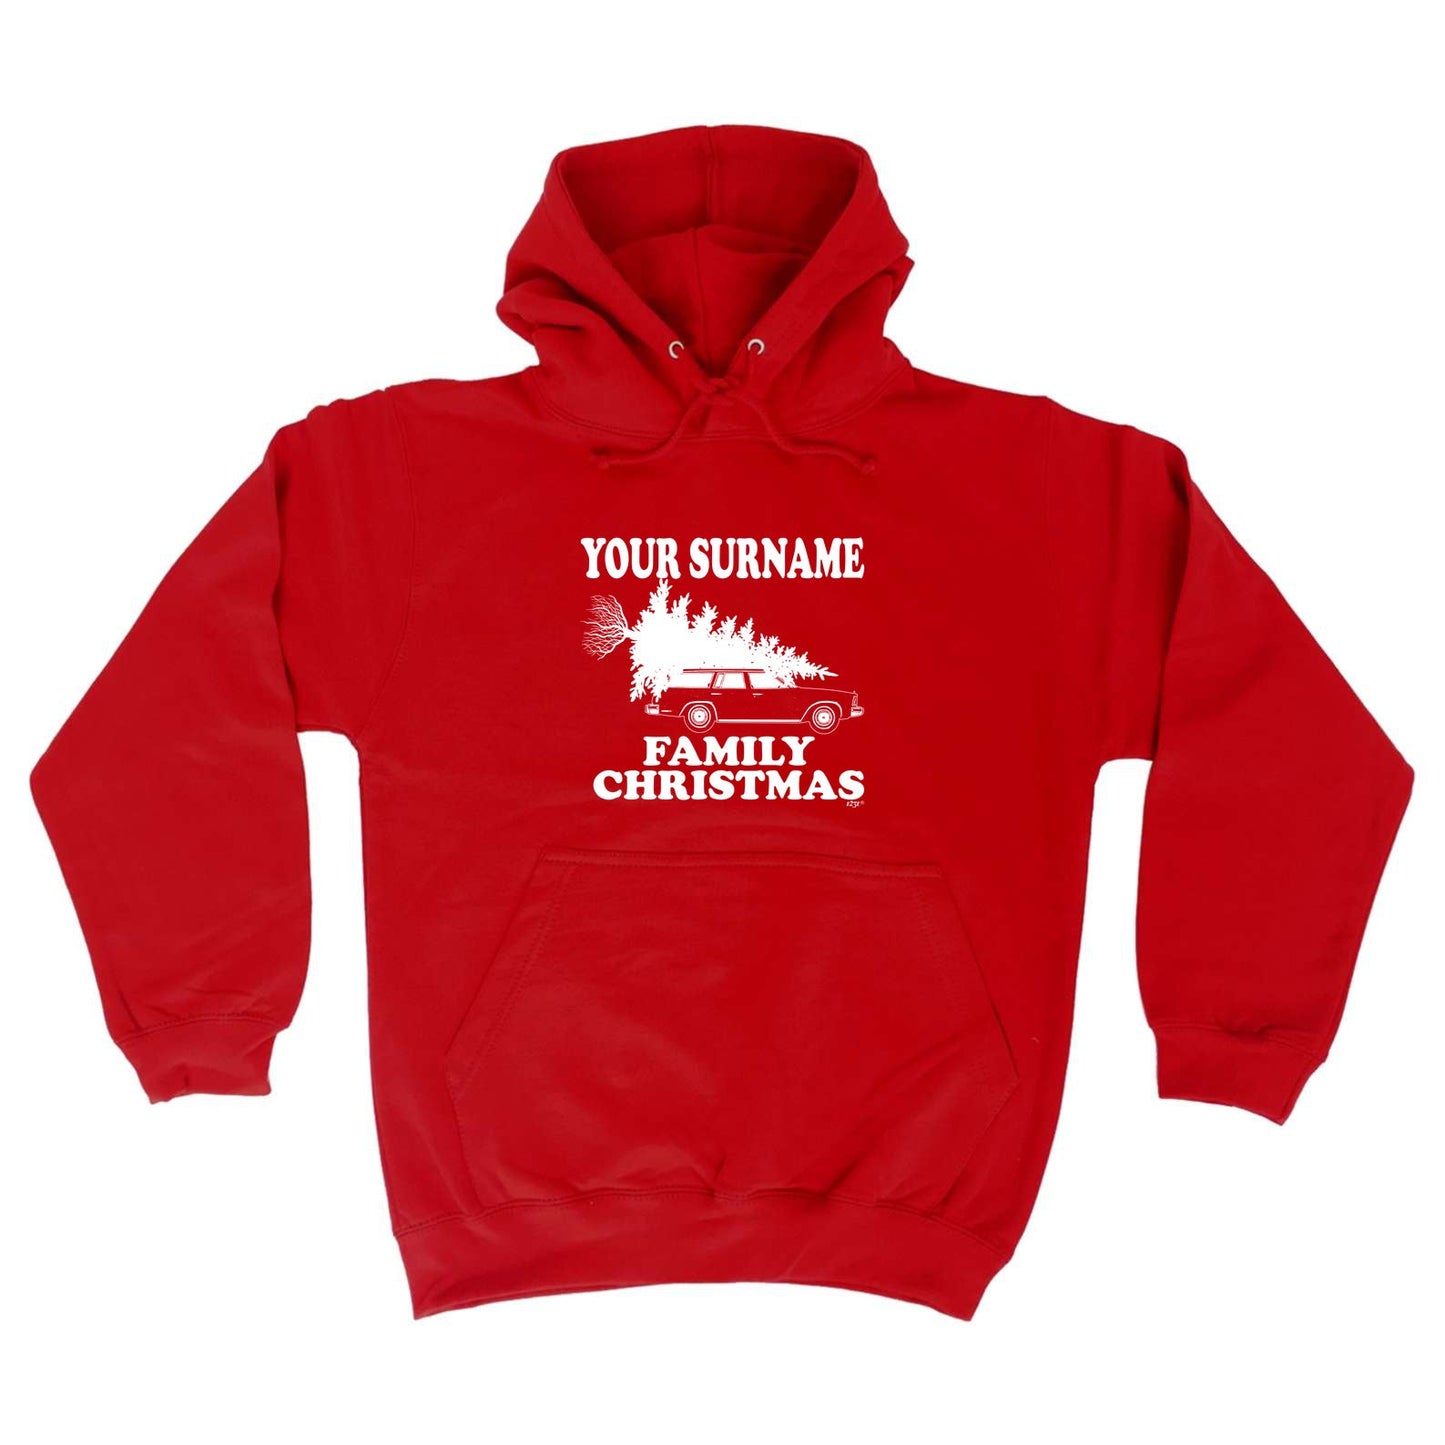 Family Christmas Your Surname Personalised - Xmas Novelty Hoodies Hoodie